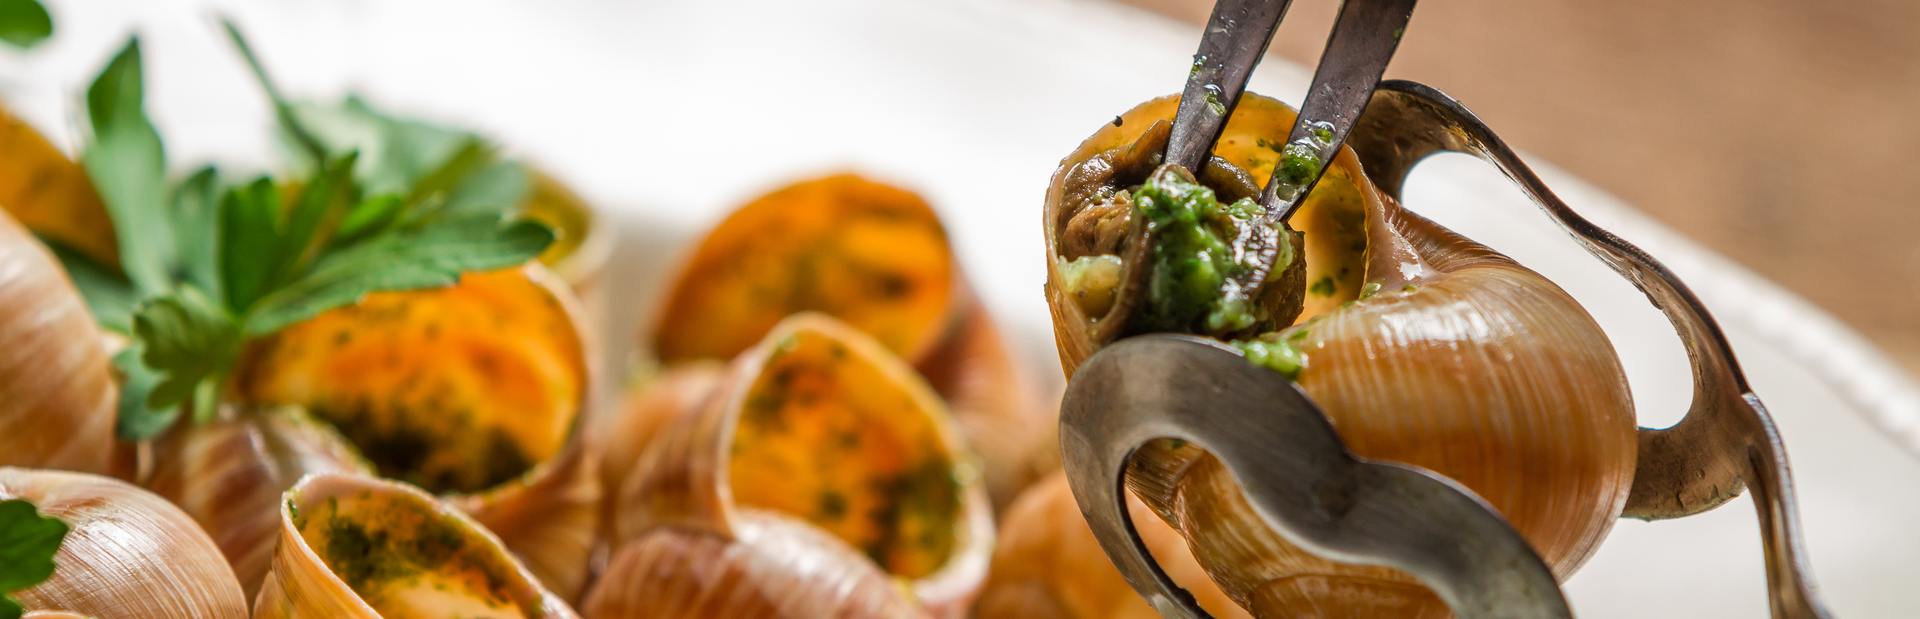 6 French delicacies you should try while visiting the South of France by superyacht